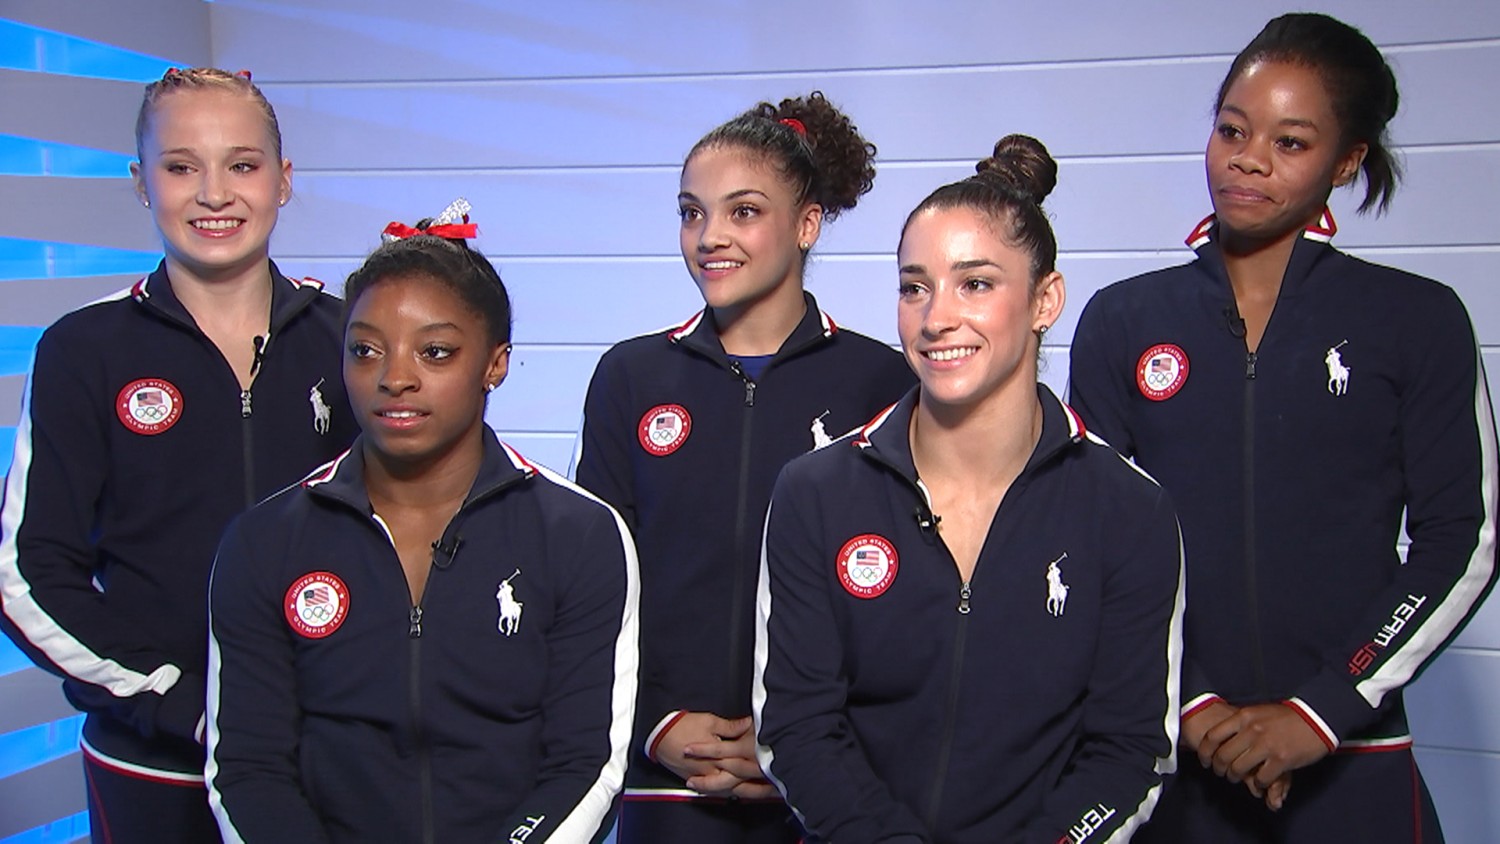 Rio 2016: the diverse women's gymnastics team is great. But it